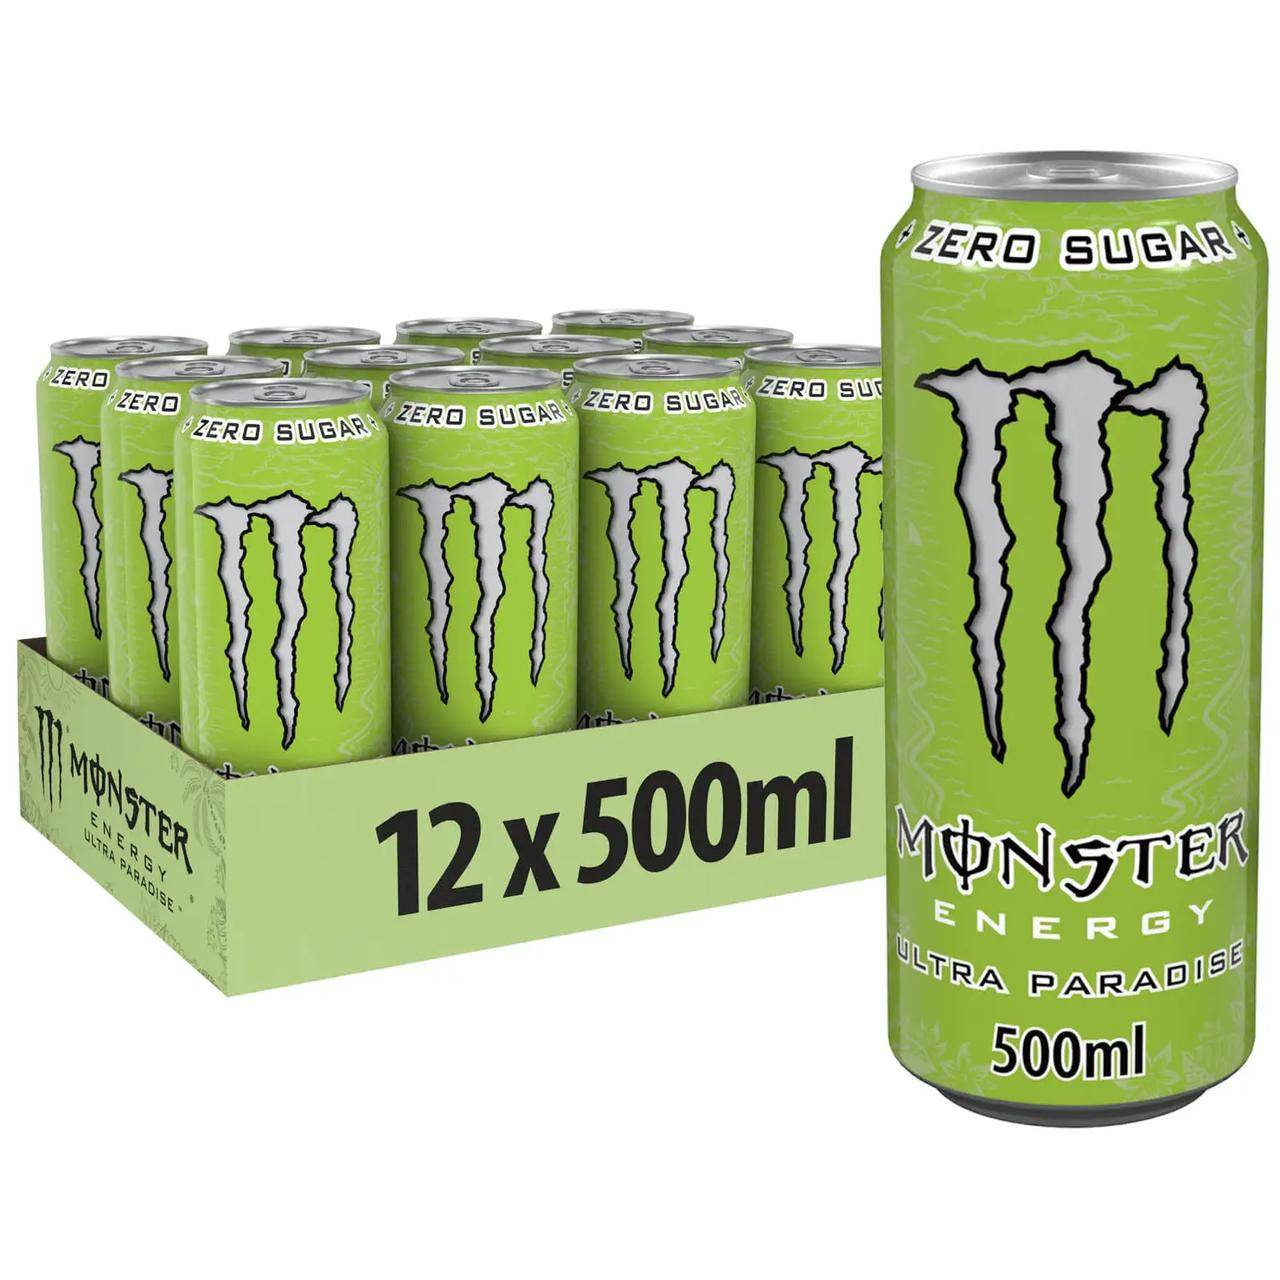 Monster Energy Drink Sizes: Choosing Your Energy Boost